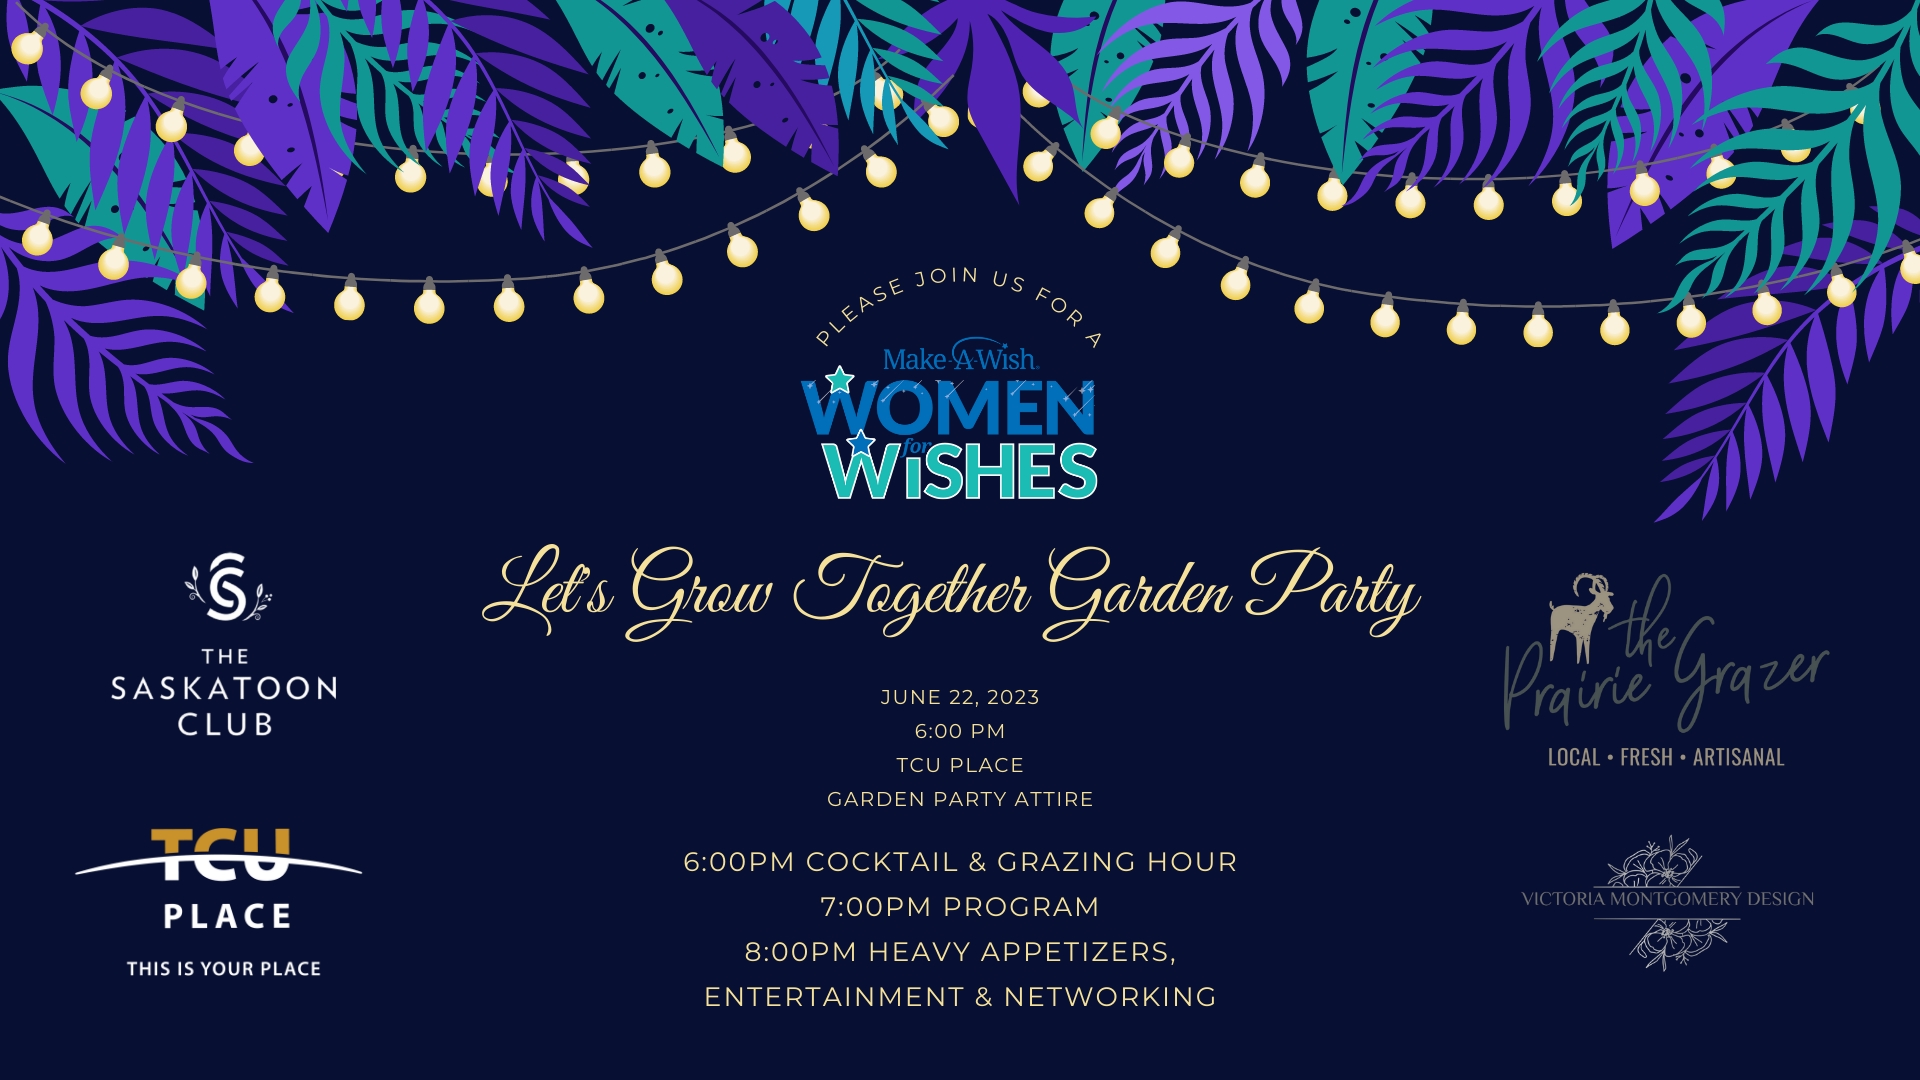 Make A Wish Foundation - Let's Grow Together Garden Party - June 22nd at TCU Place